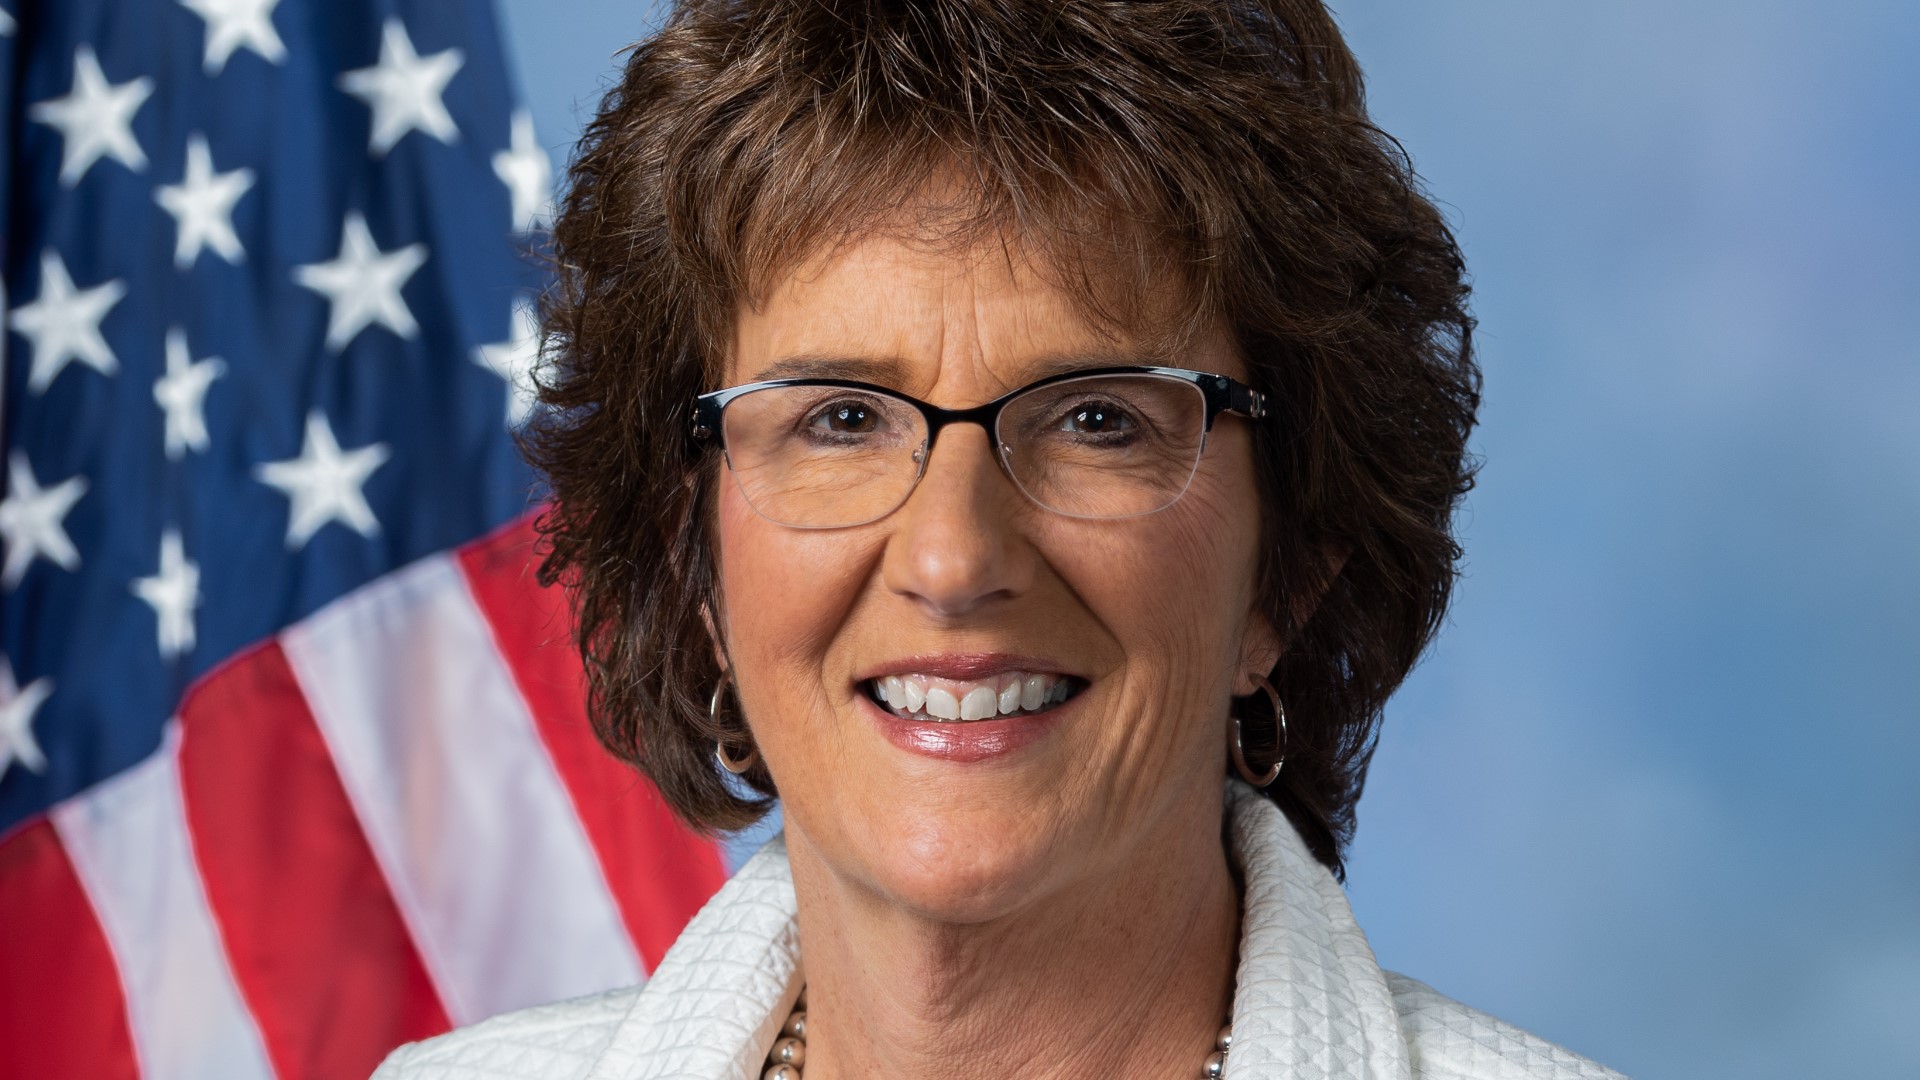 Indiana Congresswoman Jackie Walorski, two of her staffers and a fourth person were killed in a crash last week.